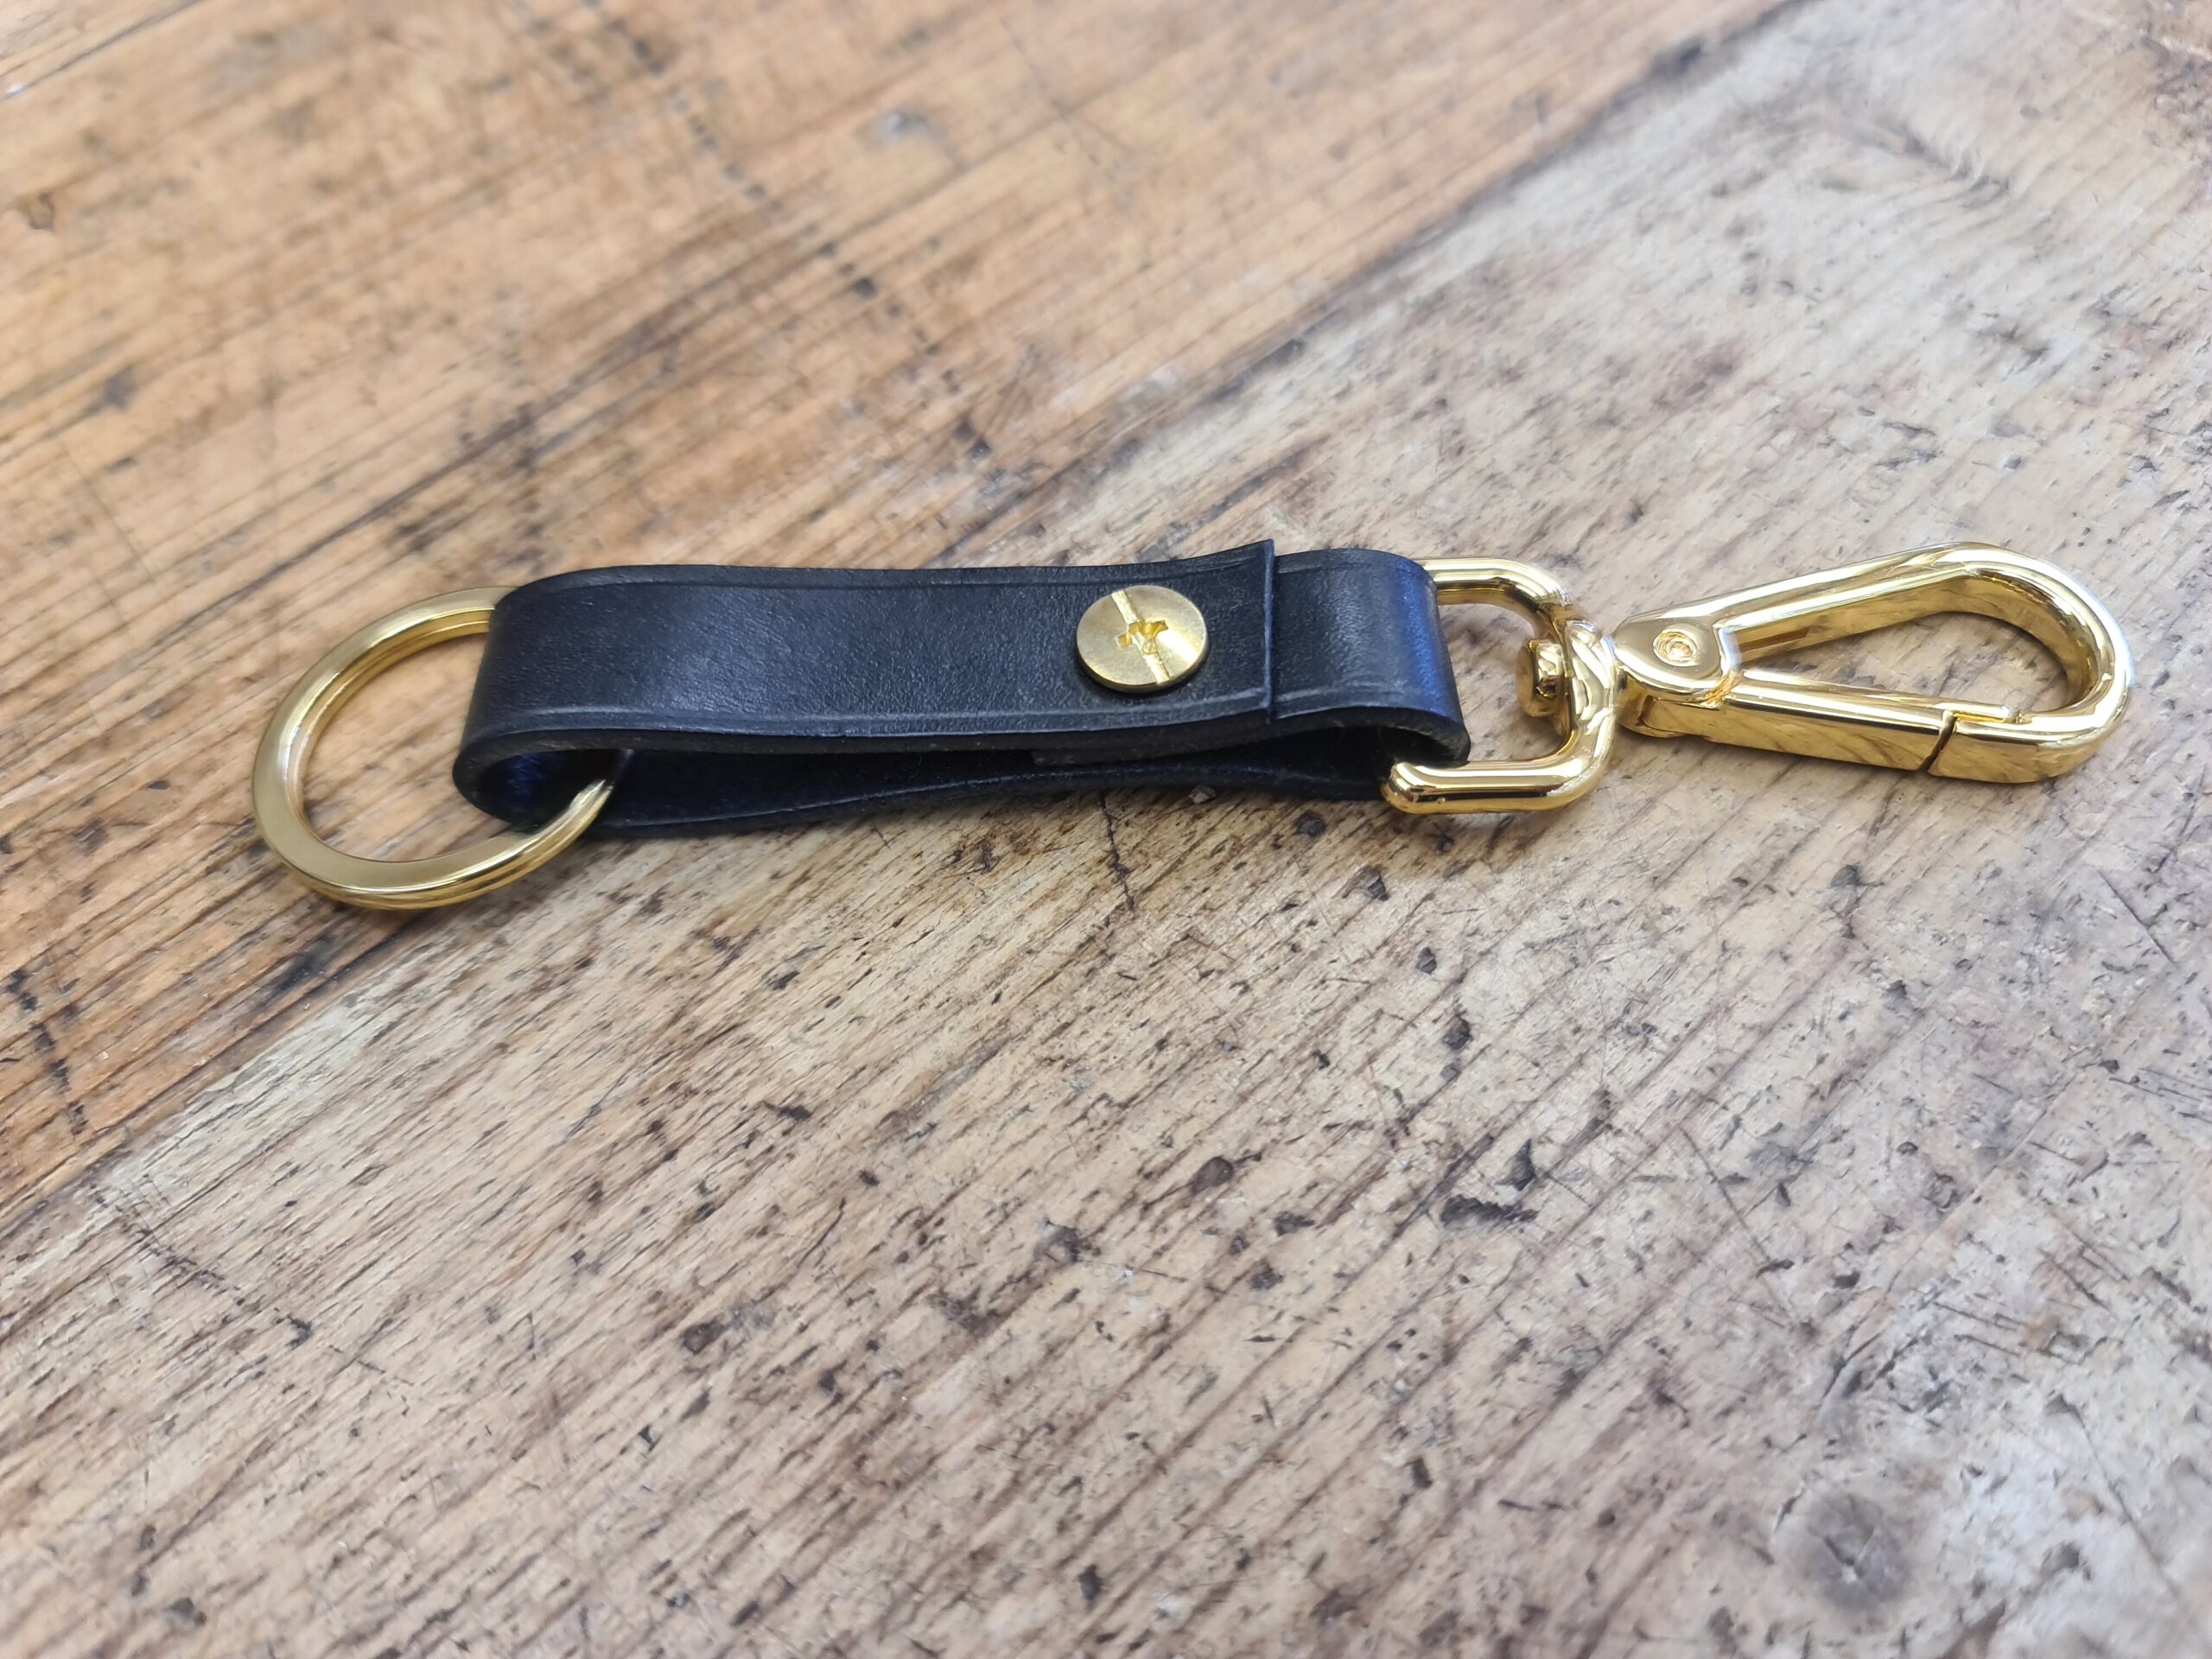 Coach, Accessories, Authentic Coach Leather Key Fob Tag